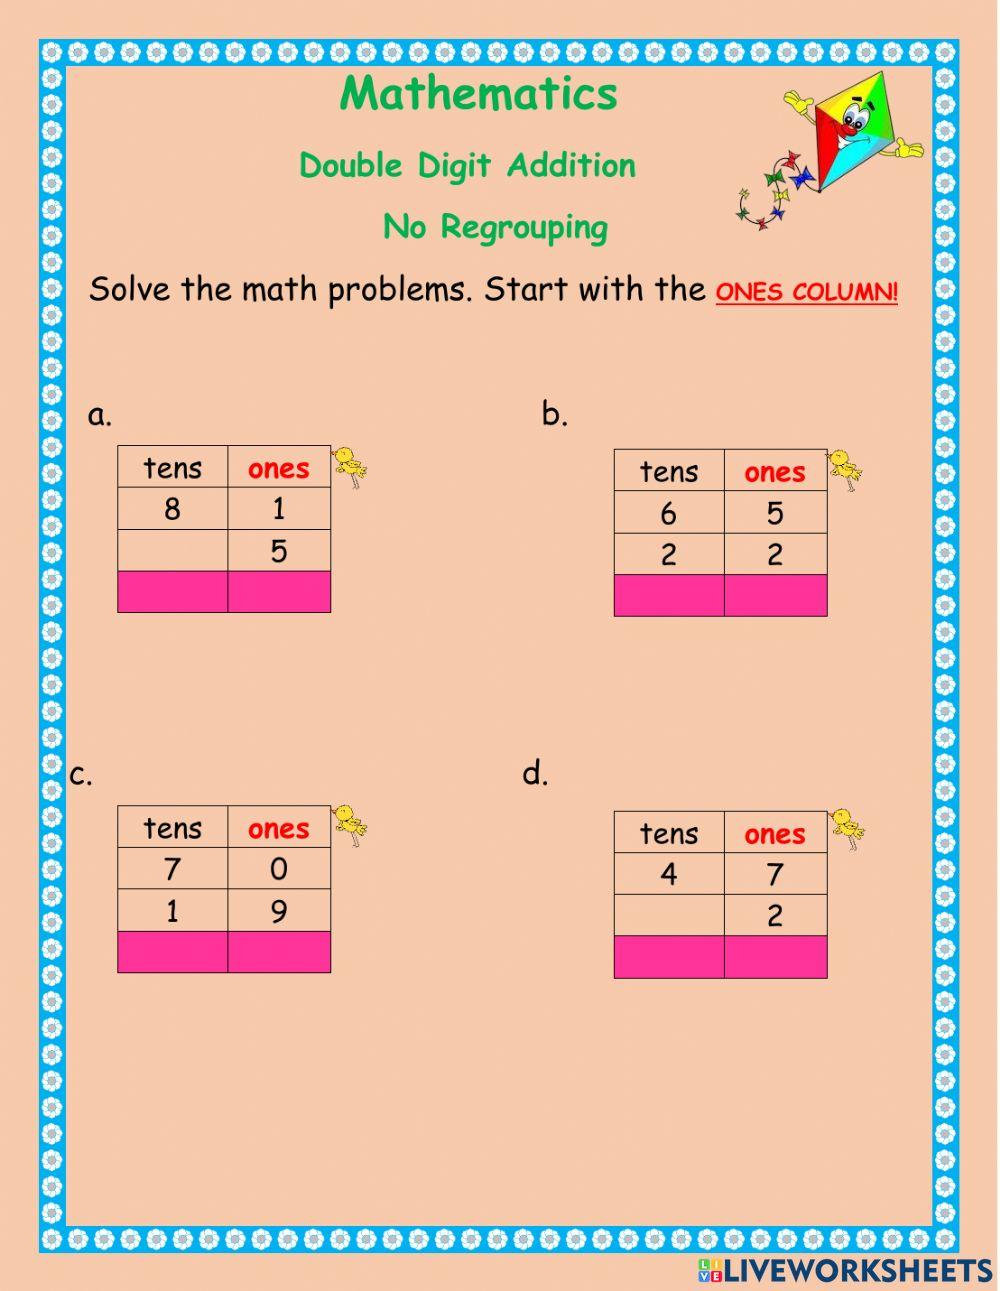 Double digit addition -3